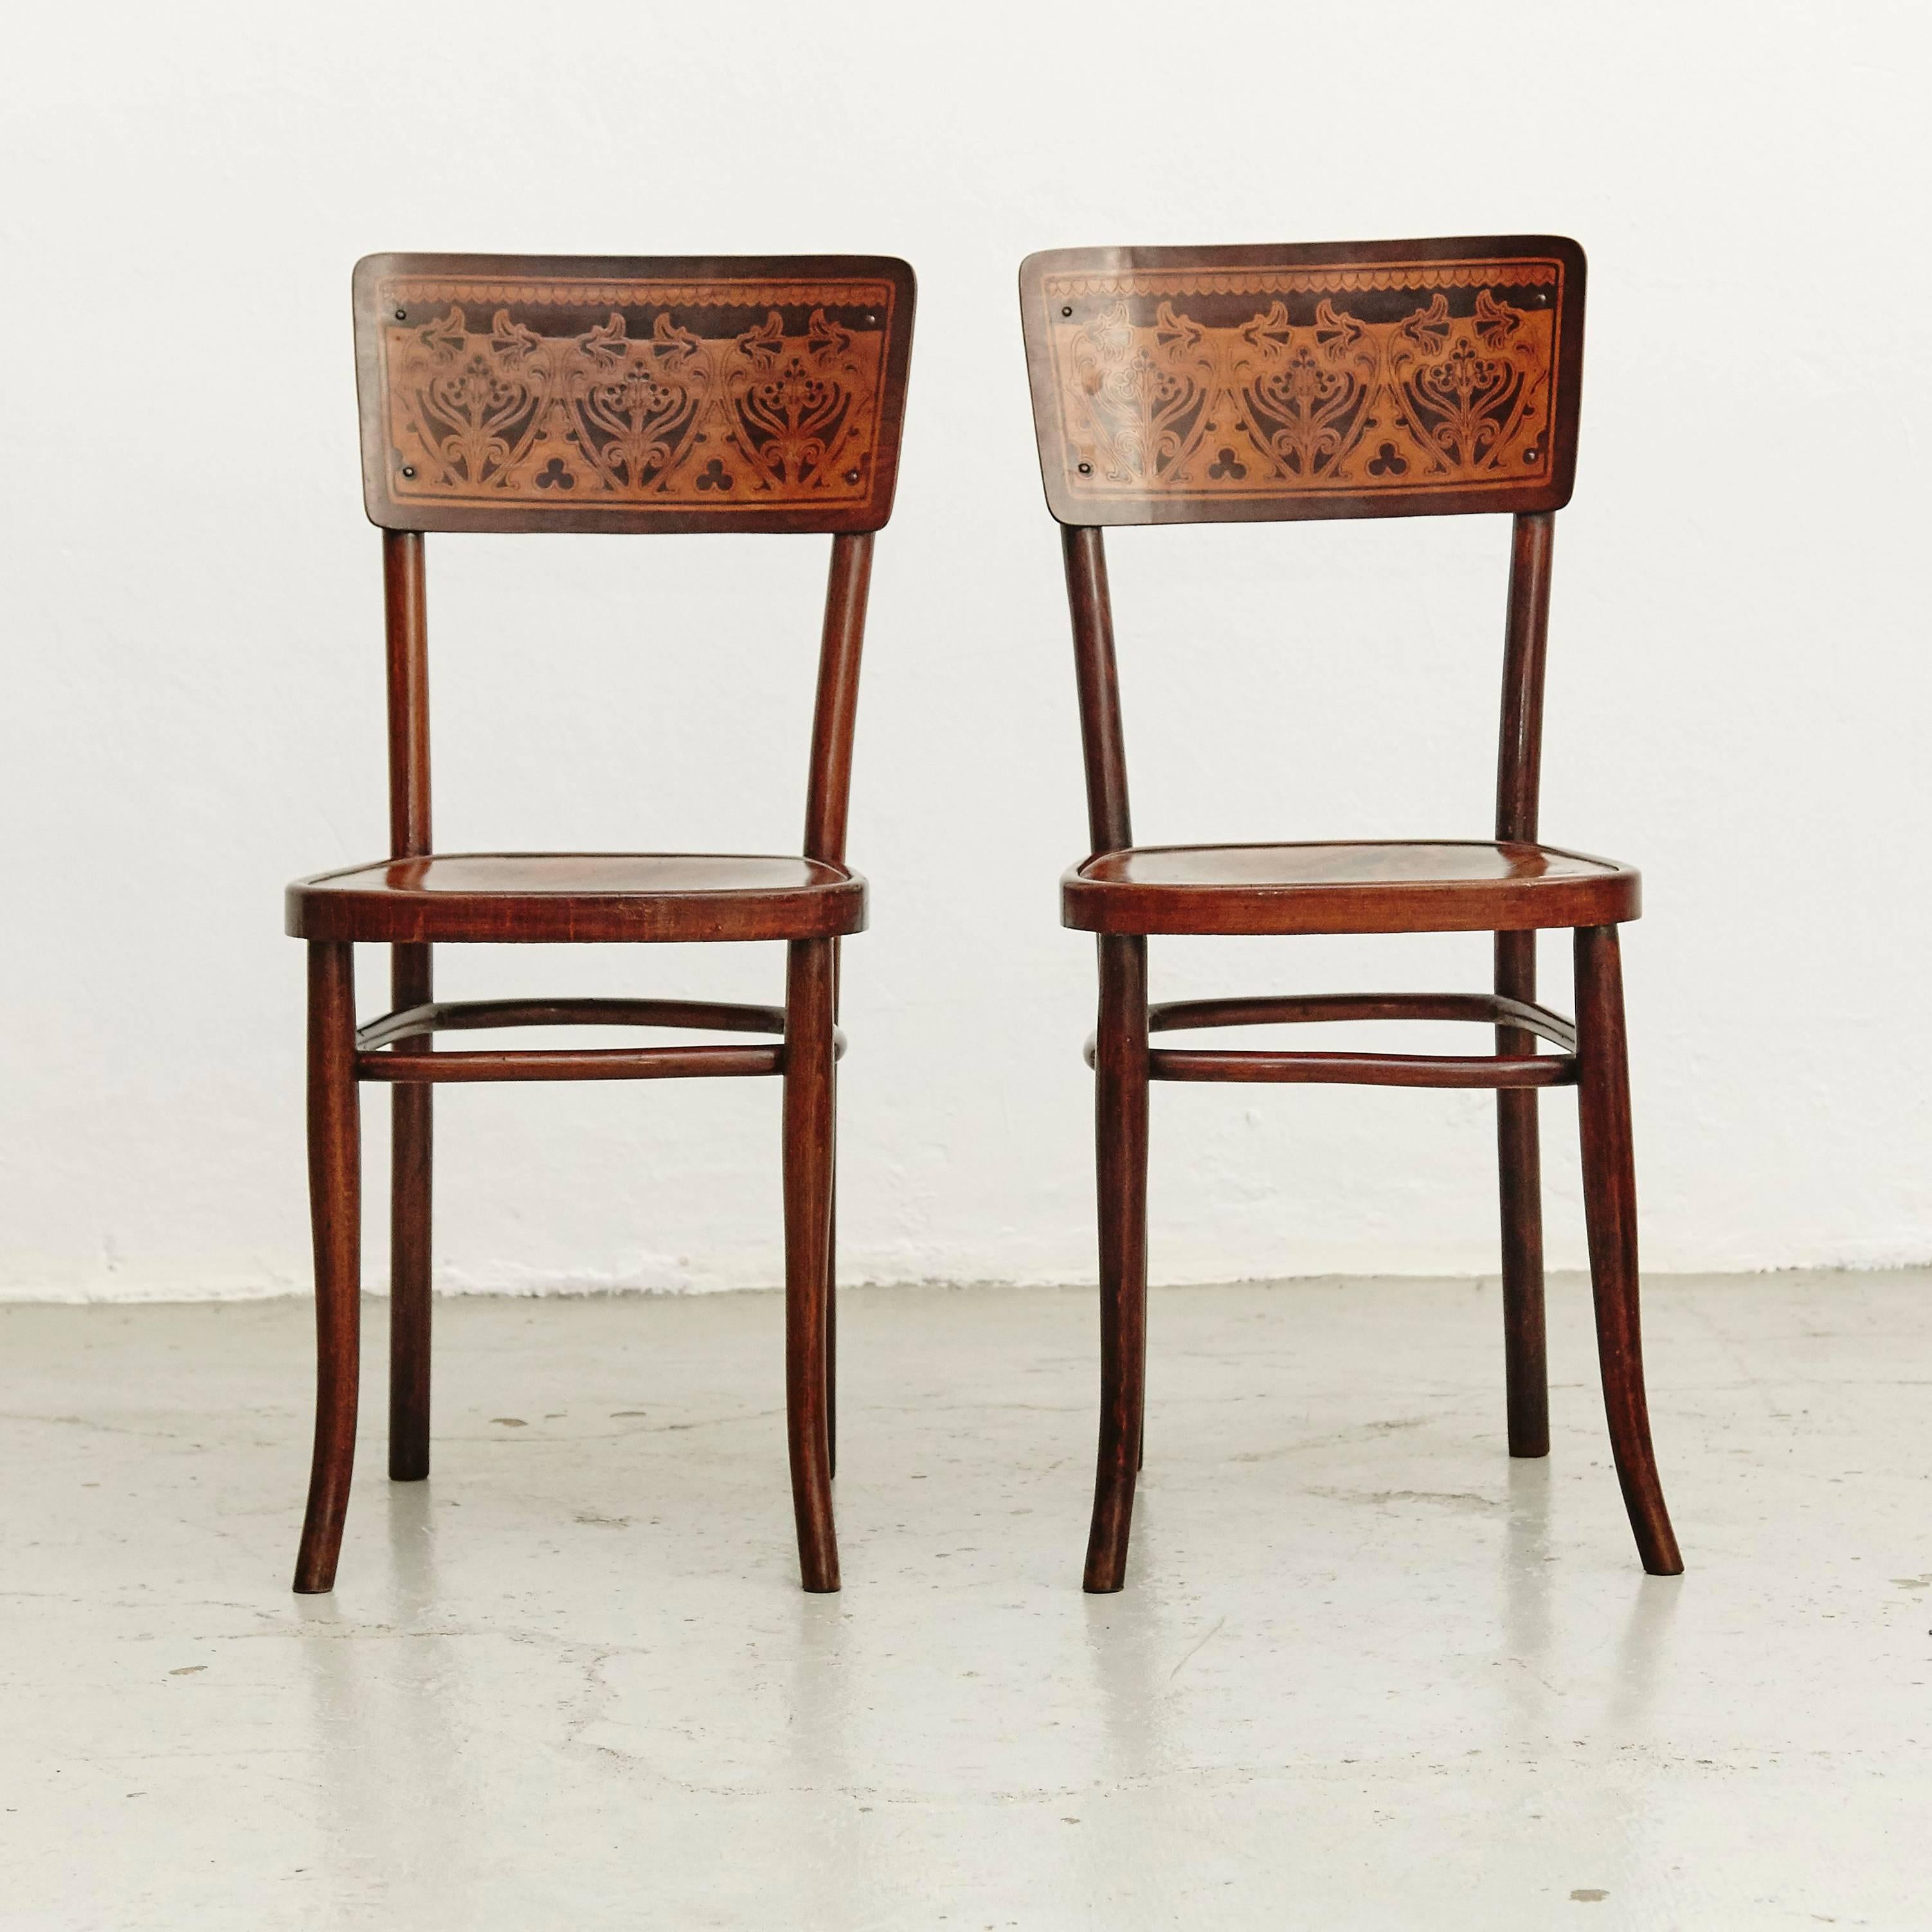 Bentwood Set of Six Chairs by August Thonet for Thonet, circa 1900